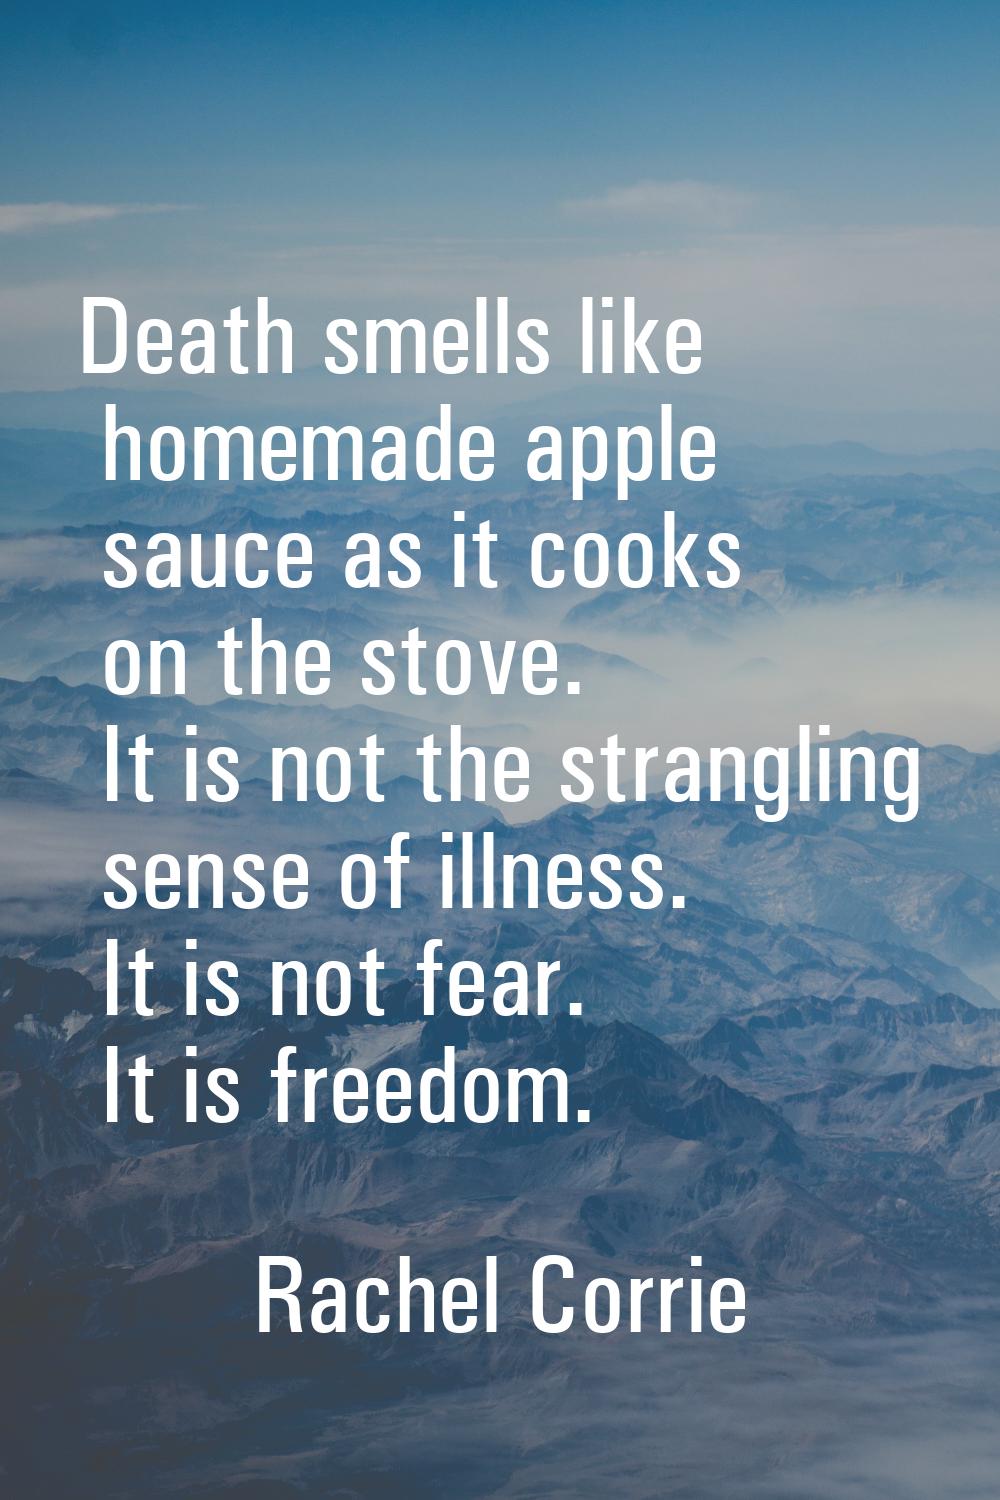 Death smells like homemade apple sauce as it cooks on the stove. It is not the strangling sense of 